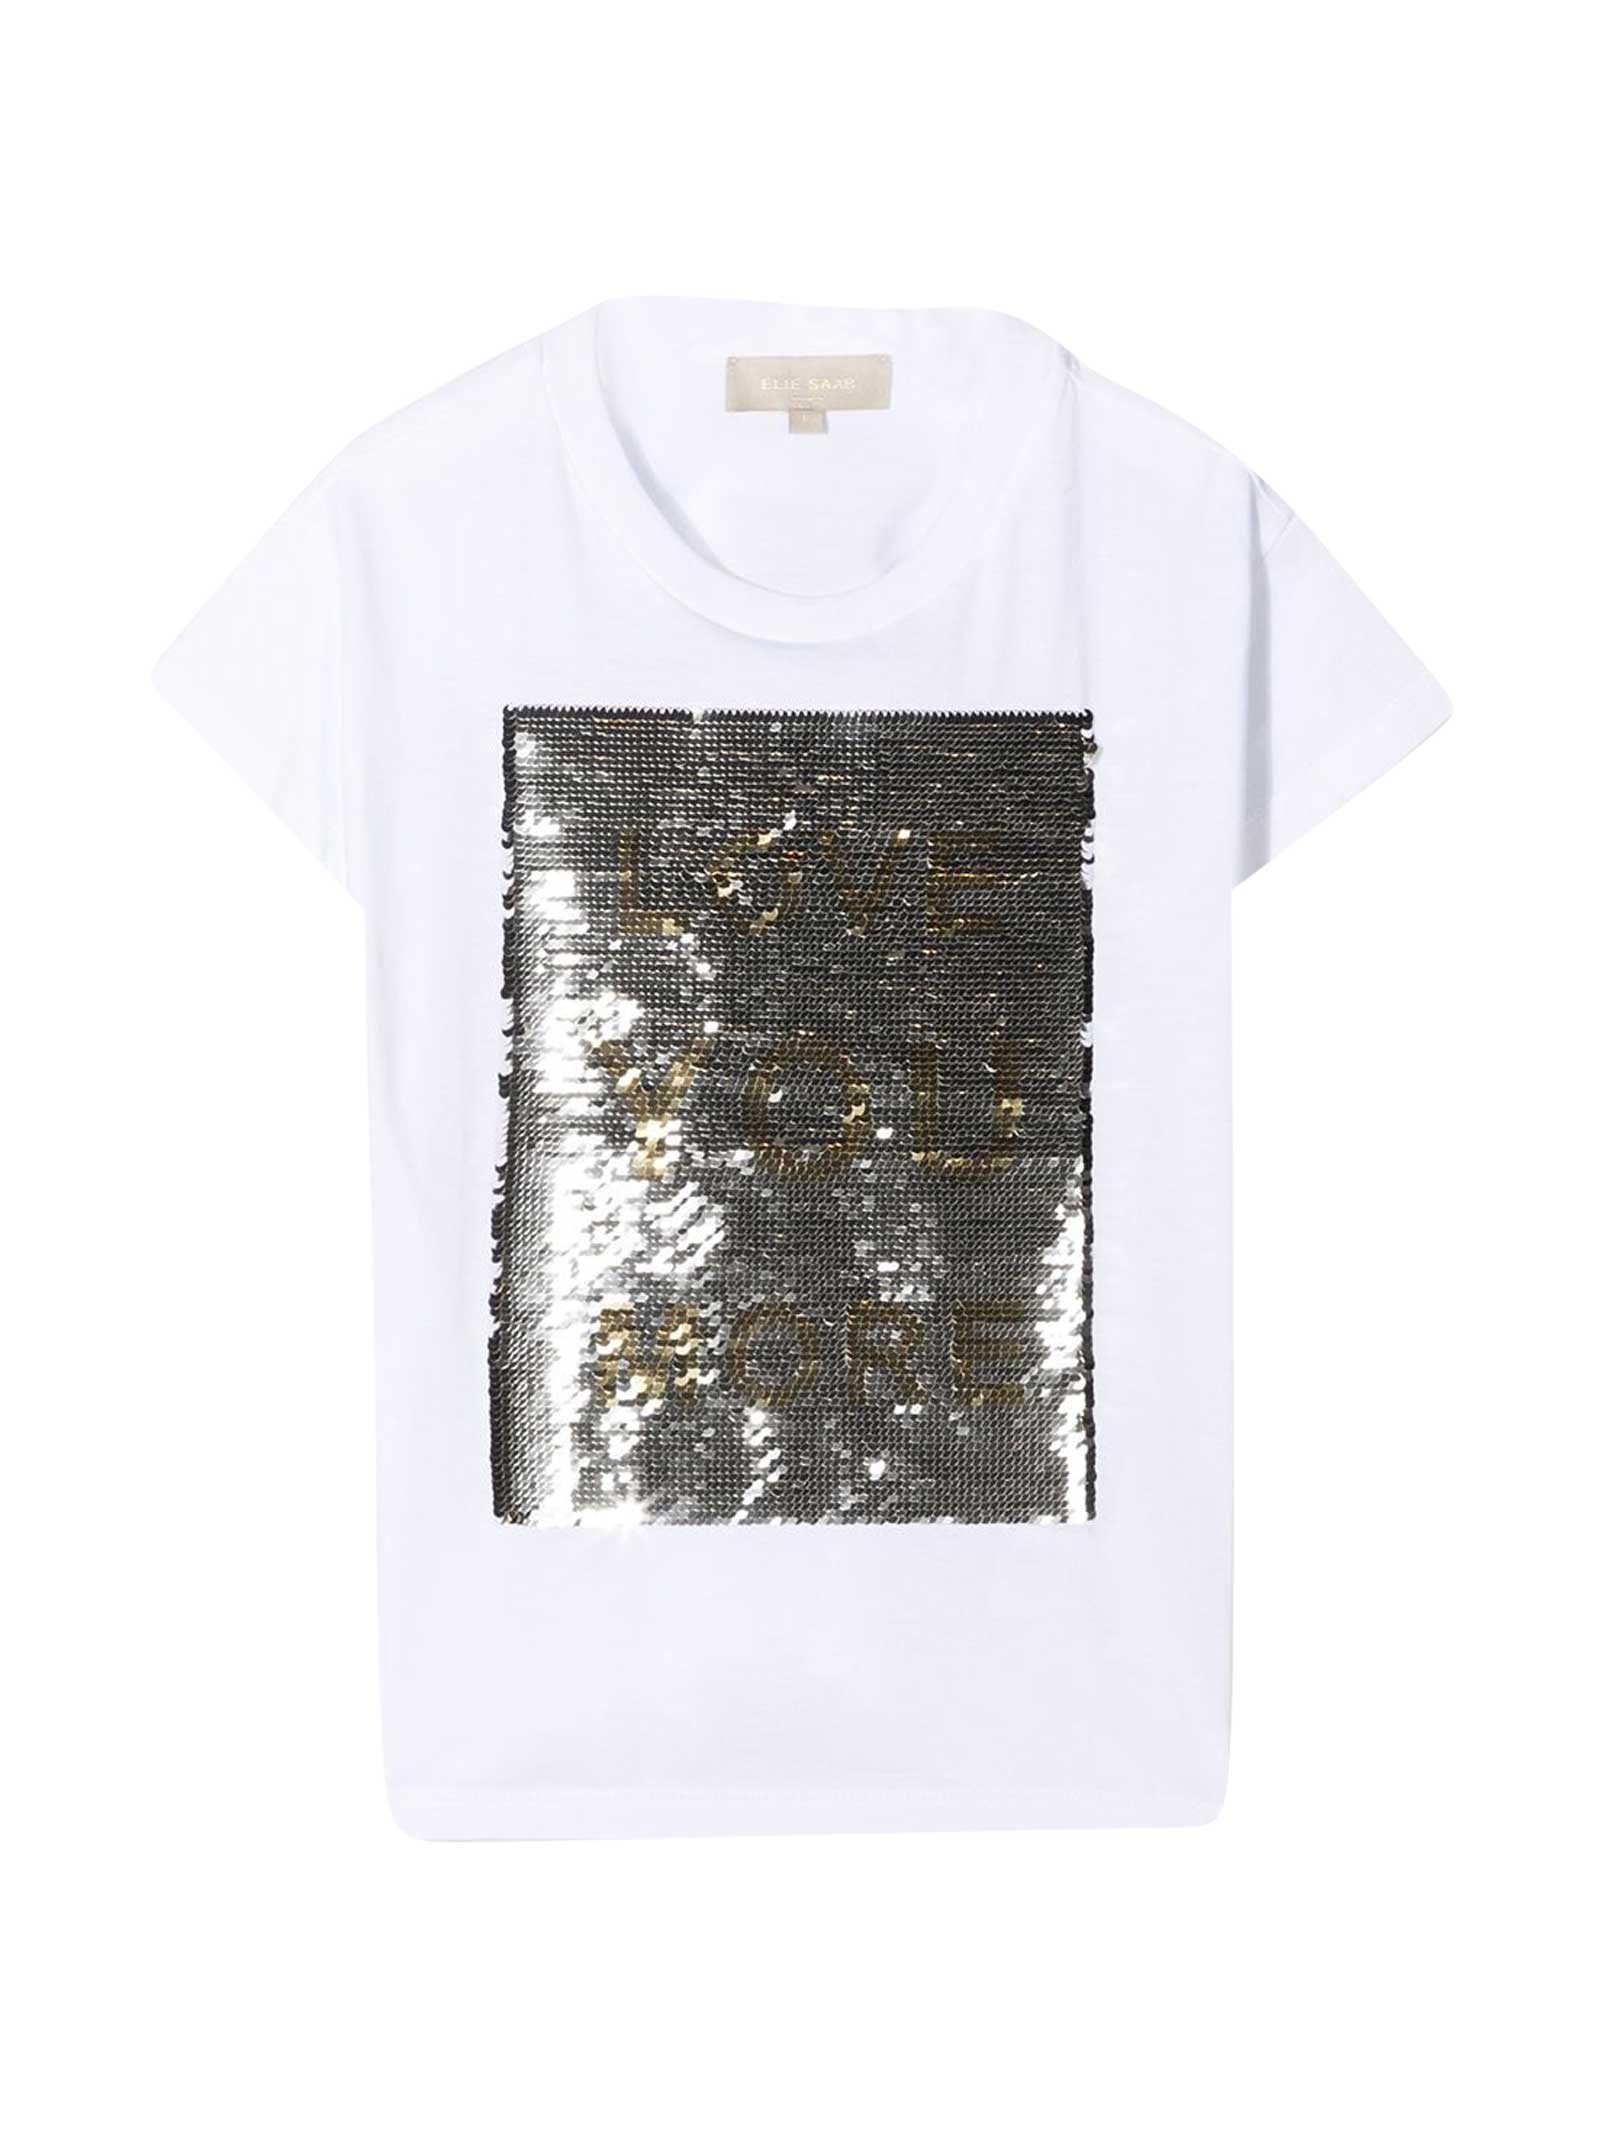 Elie Saab White T-shirt With Gold Paillettes